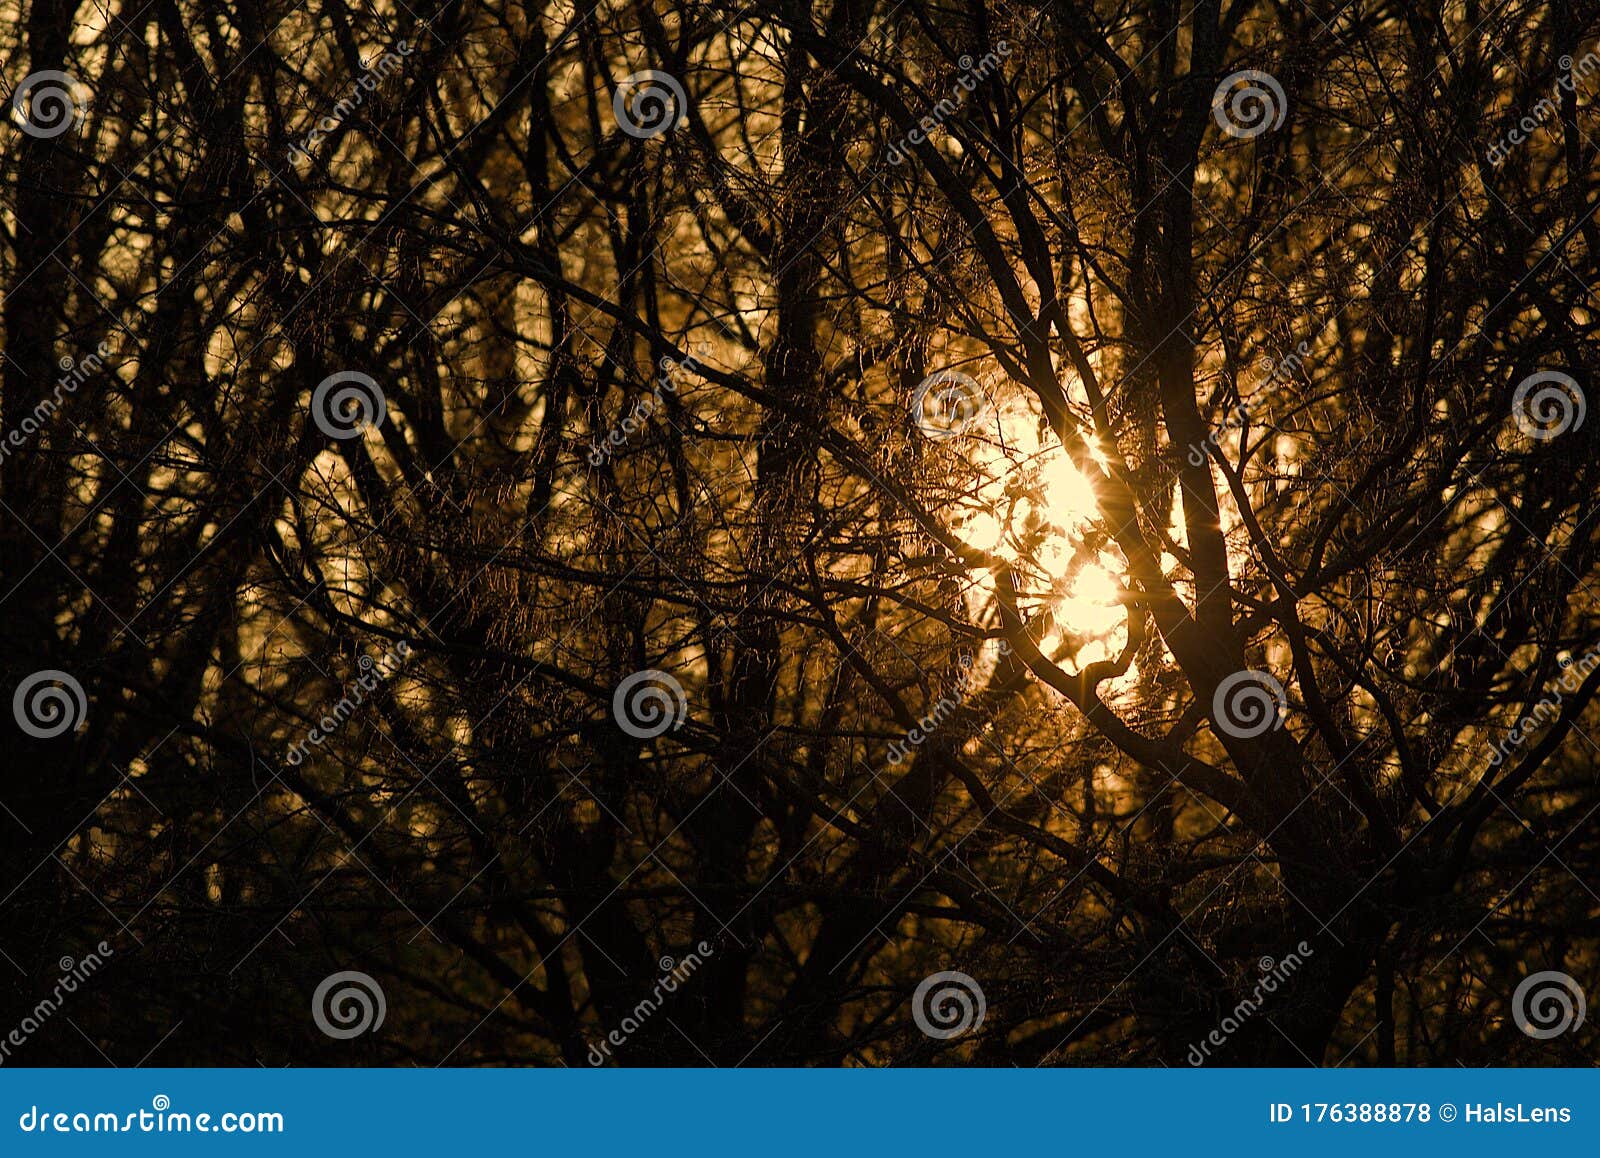 Sunrise Through The Branches Stock Photo - Image of shine, bright